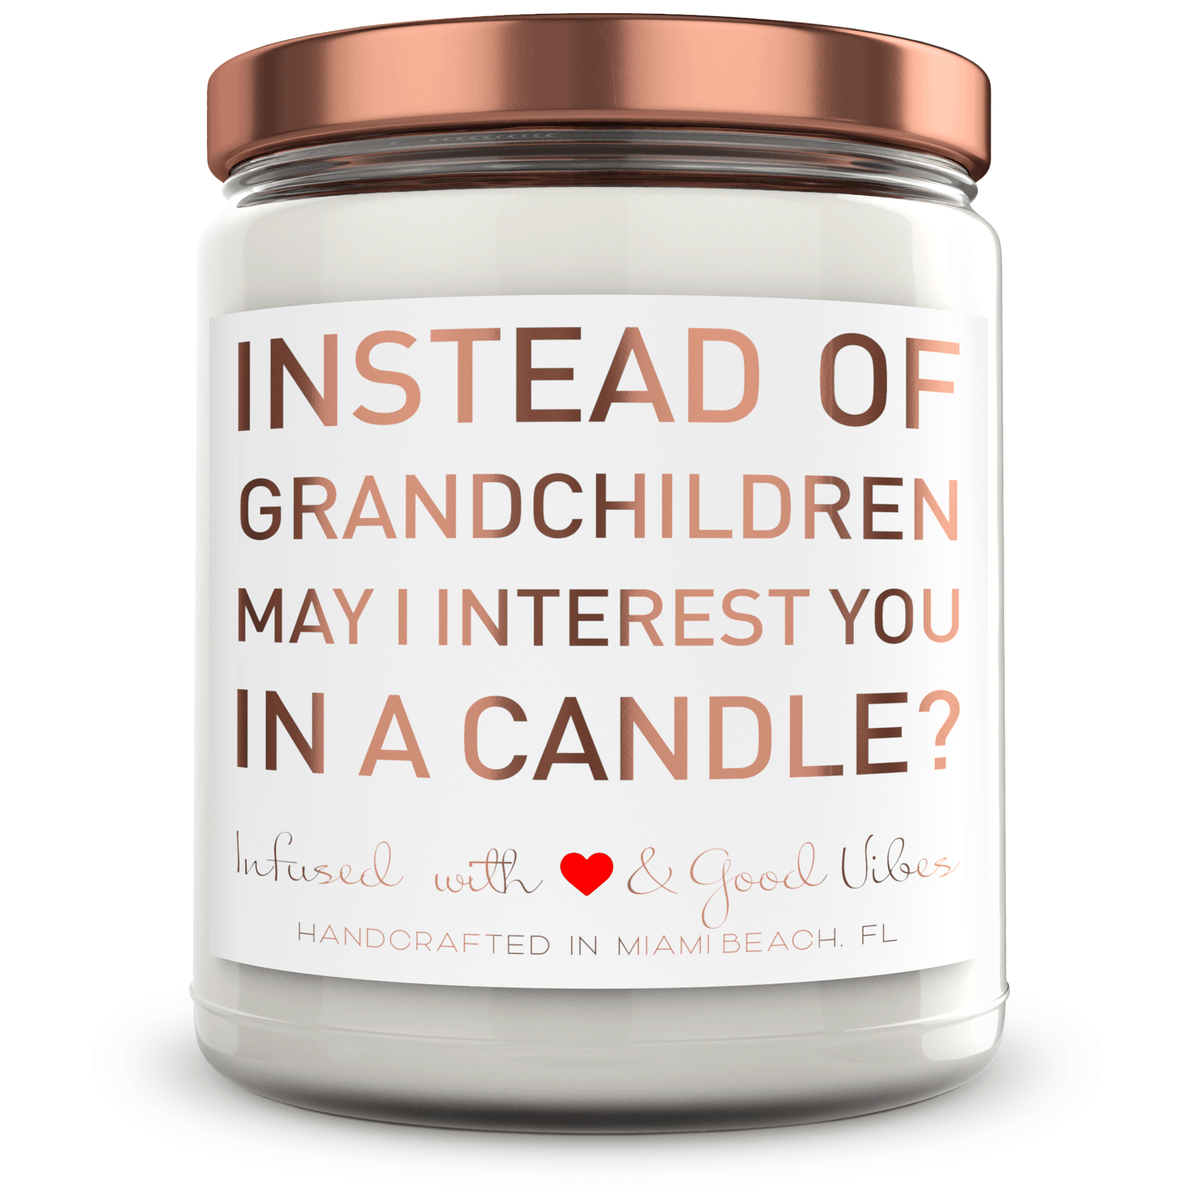 Instead of Grandchildren, may I interest you in a candle? - Mint Sugar Candle